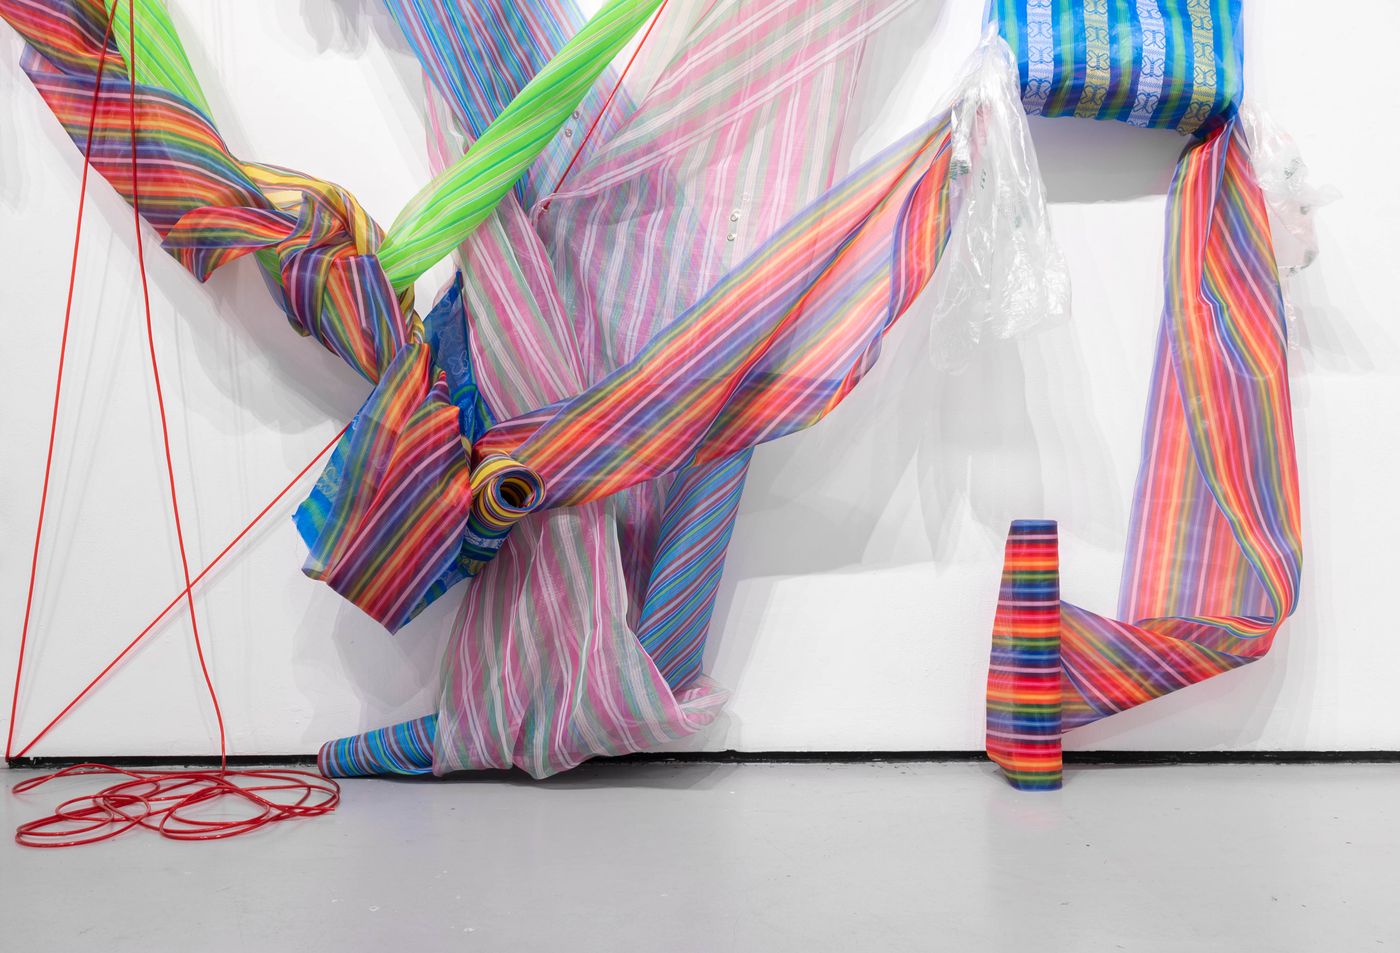 En camino / On the way (detail), 2022. Monofilament meshes, plastic handle tubing, and sewn grocery bags; 17.5 x 19.5 ft. Photo: Allison Minto.